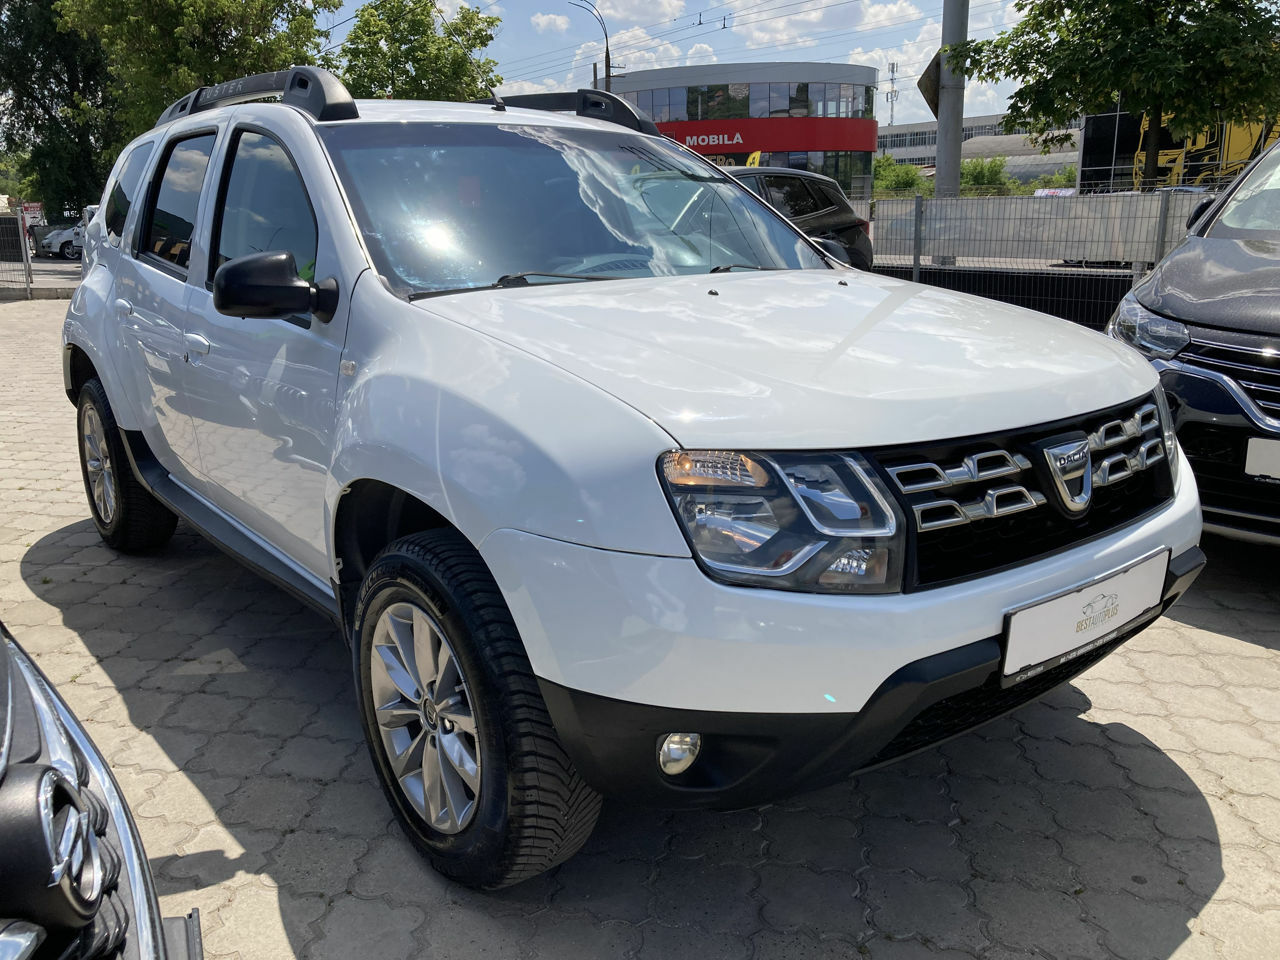 <span style="font-weight: bold;">dacia duster</span>